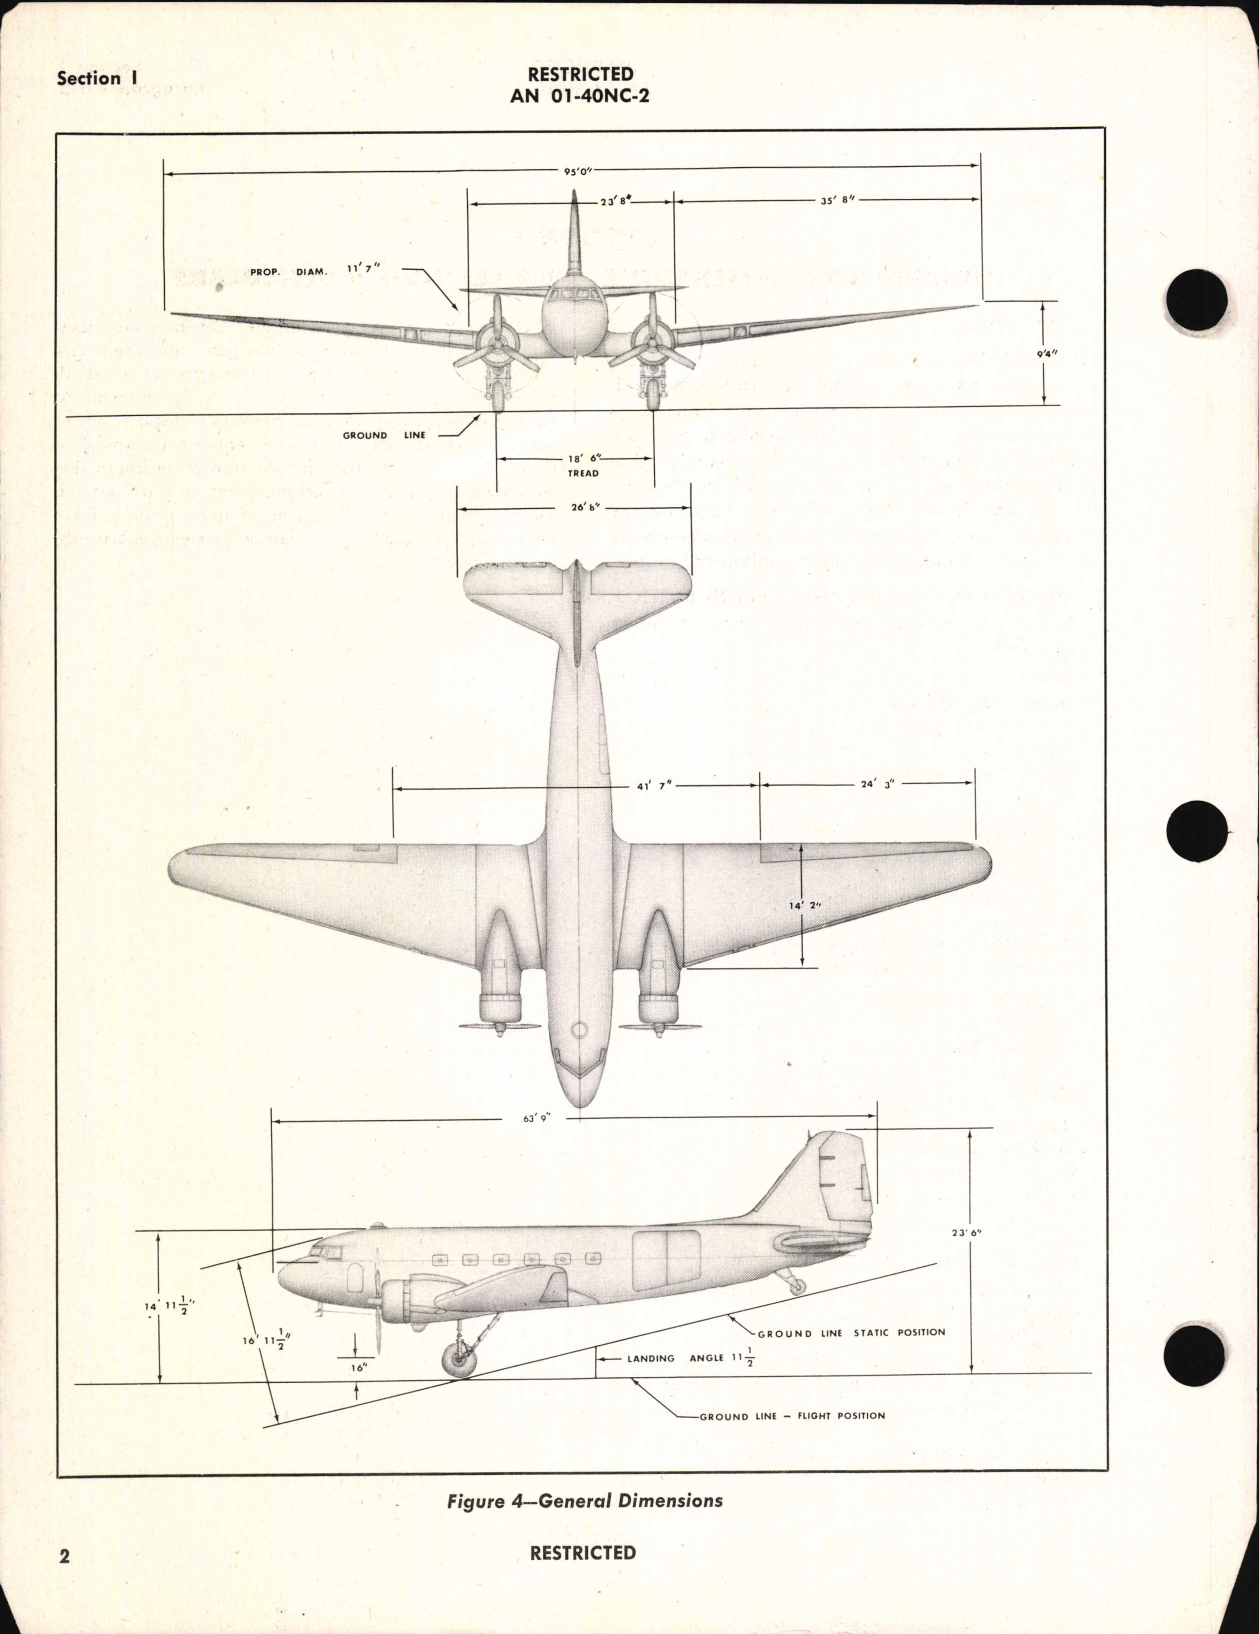 Sample page 8 from AirCorps Library document: Erection and Maintenance Instructions for C-47, C-47A, R4D-1, and R4D-5